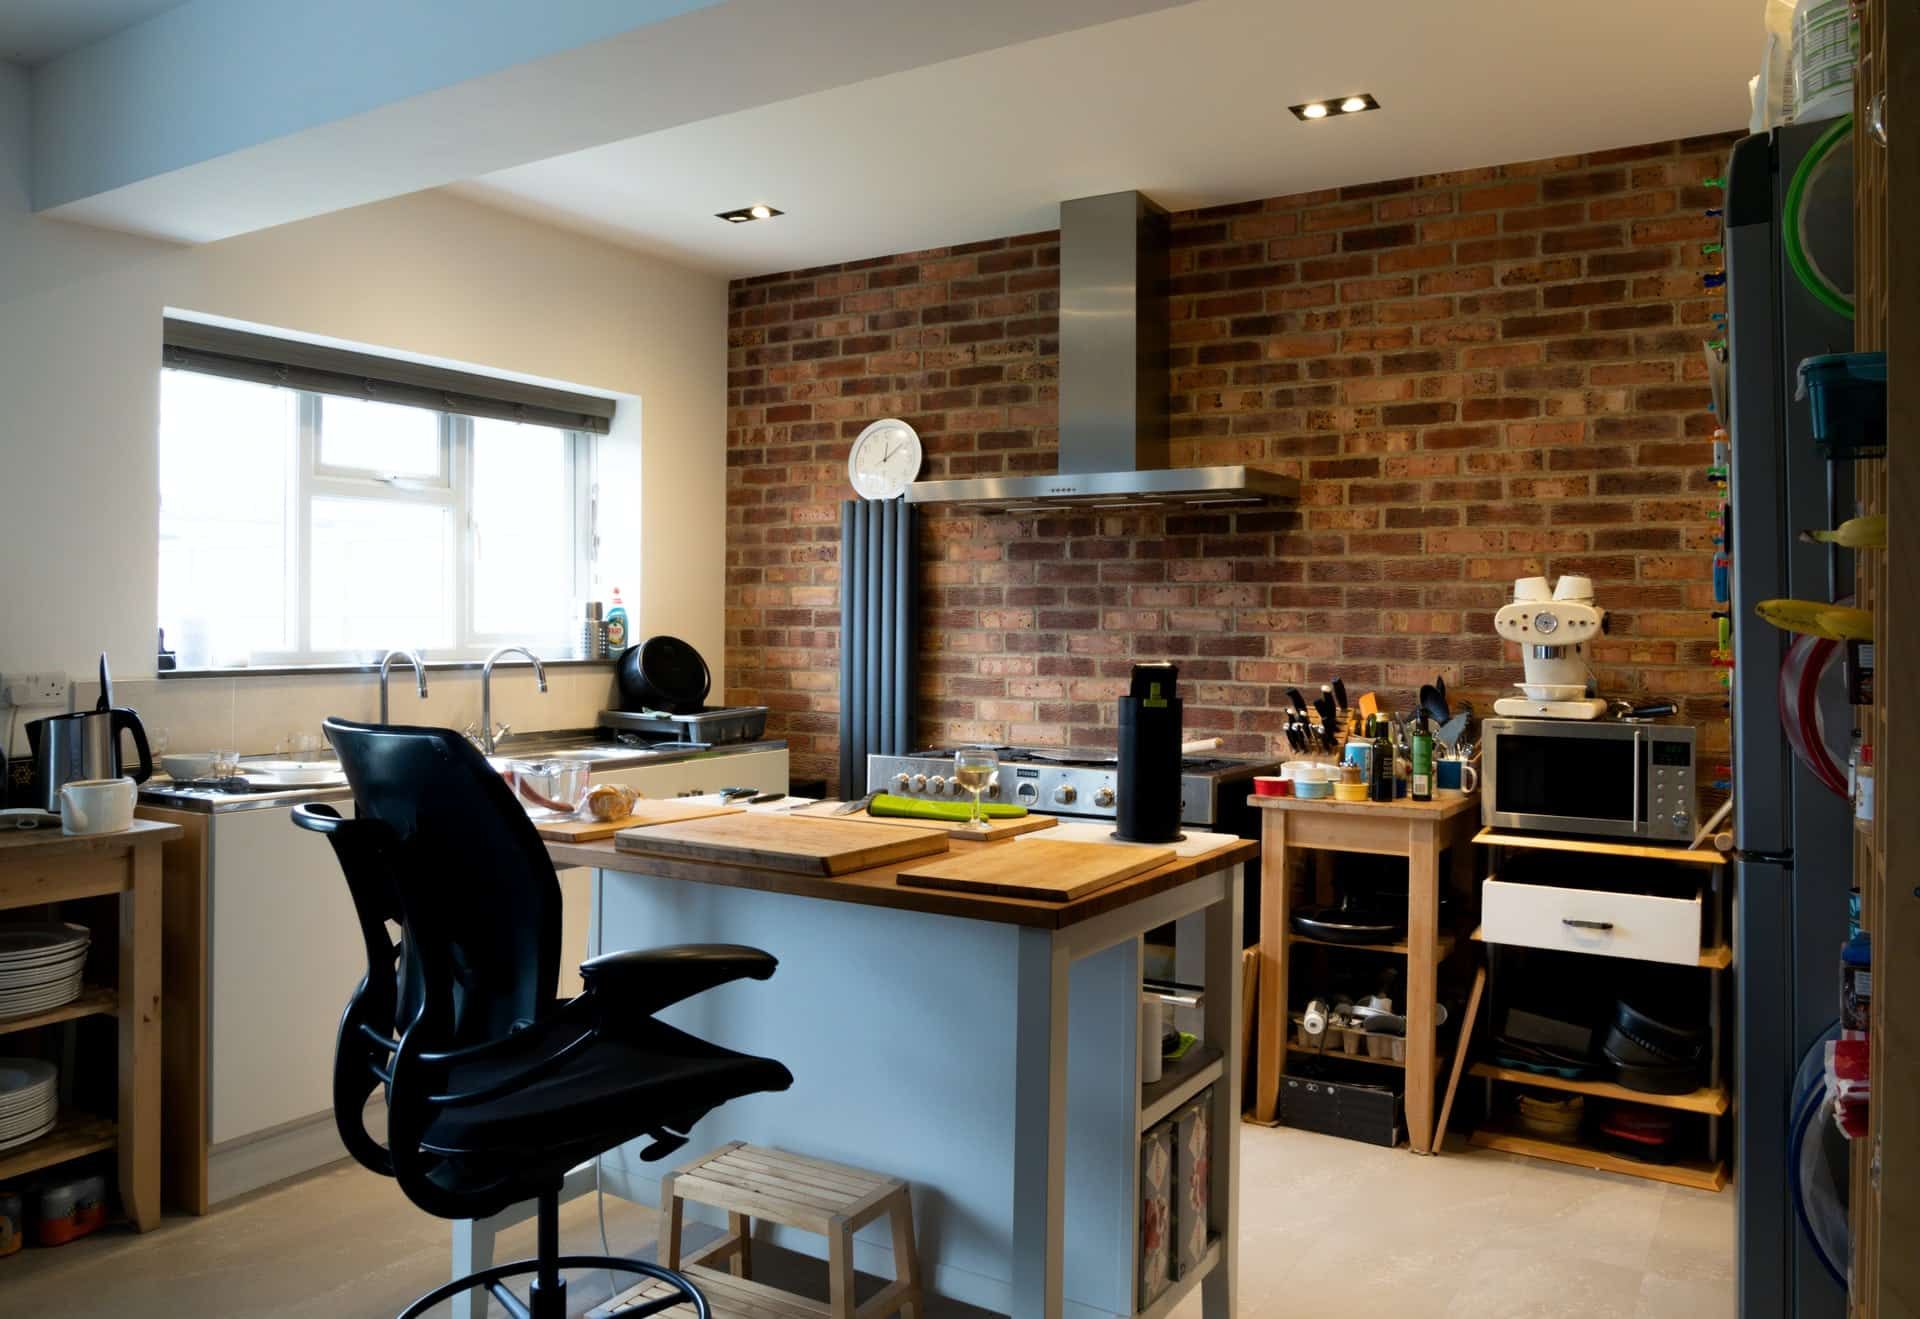 Could your kitchen become an office?